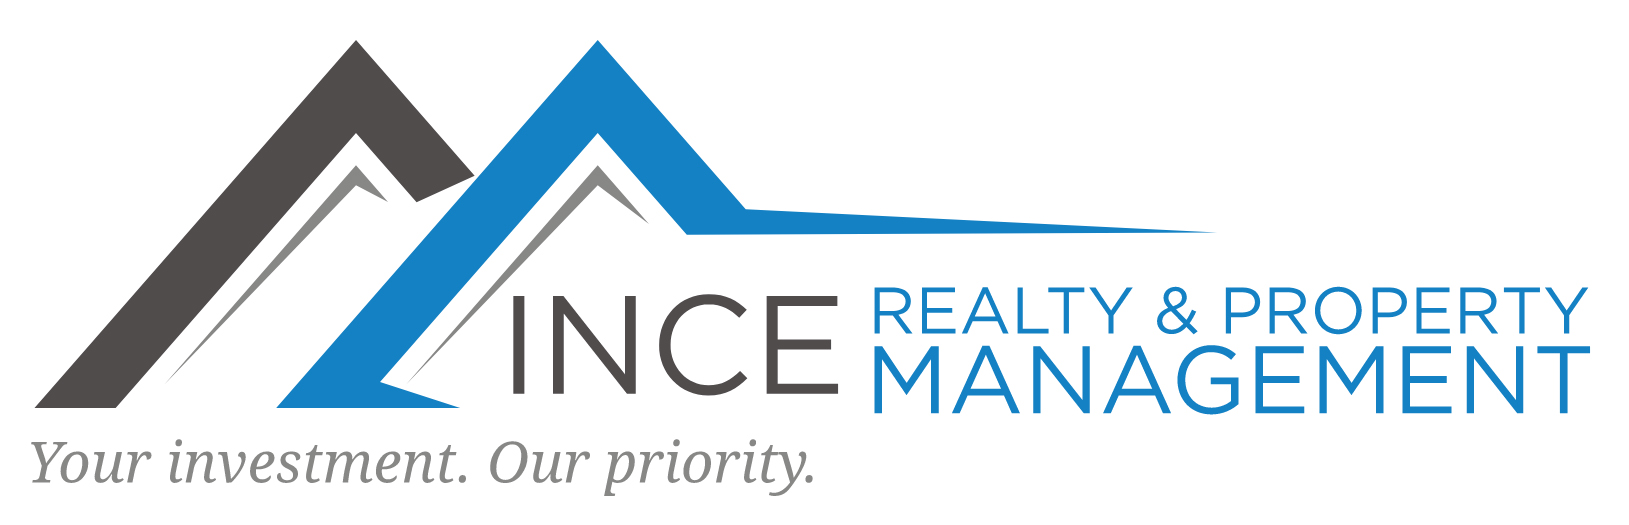 Ince Property Management